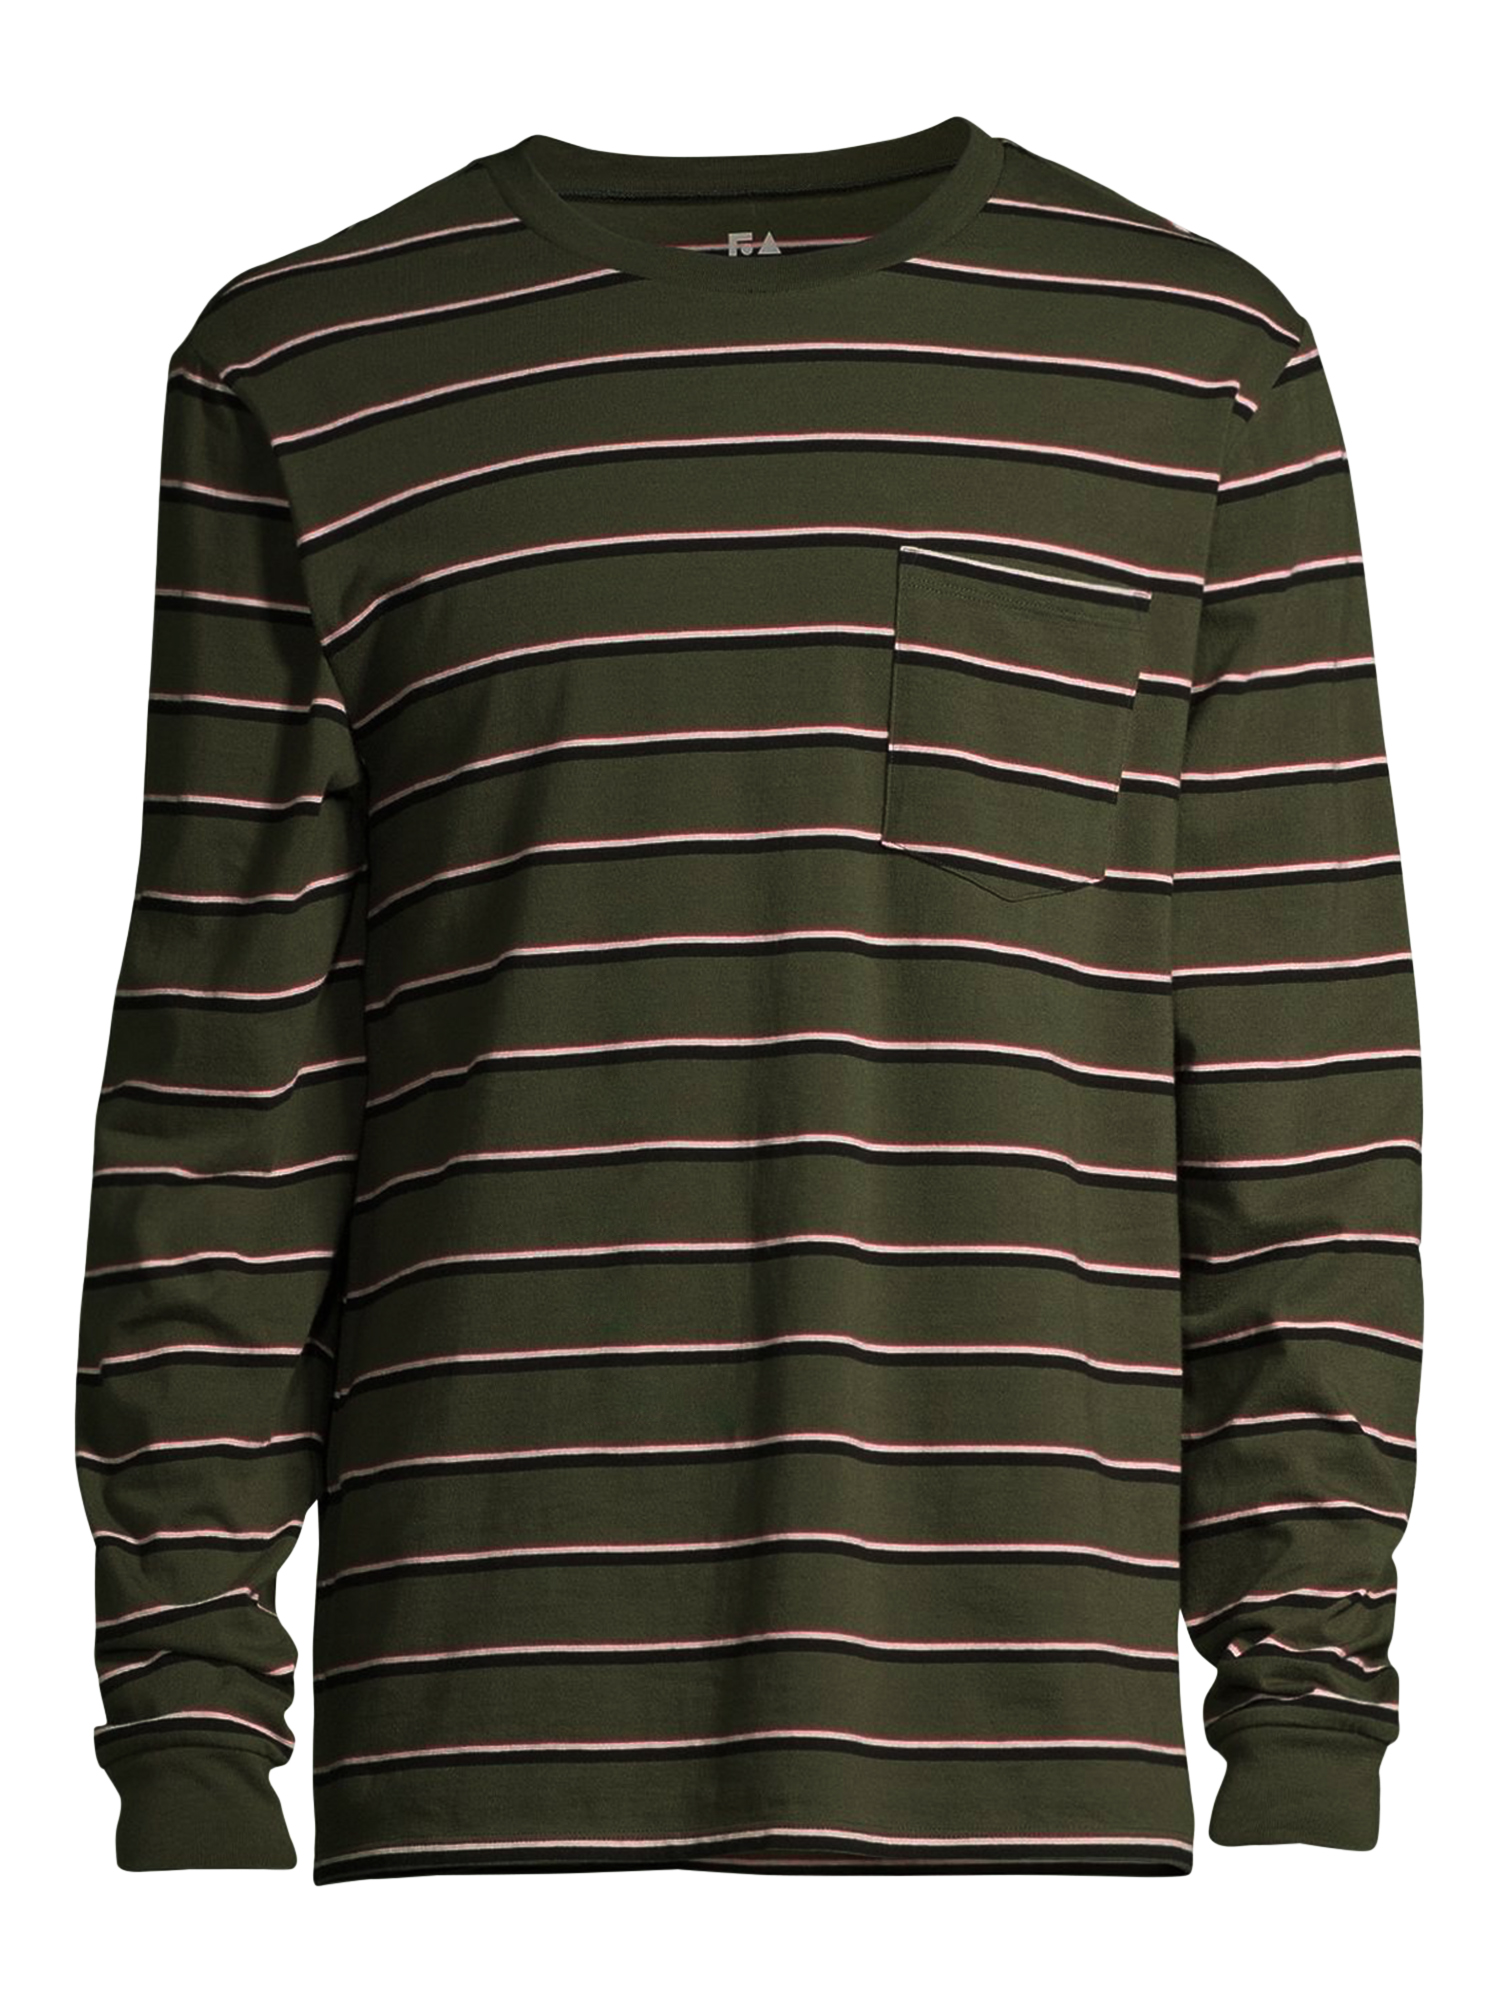 Free Assembly Men's Everyday Long Sleeve Pocket Tee - image 3 of 6